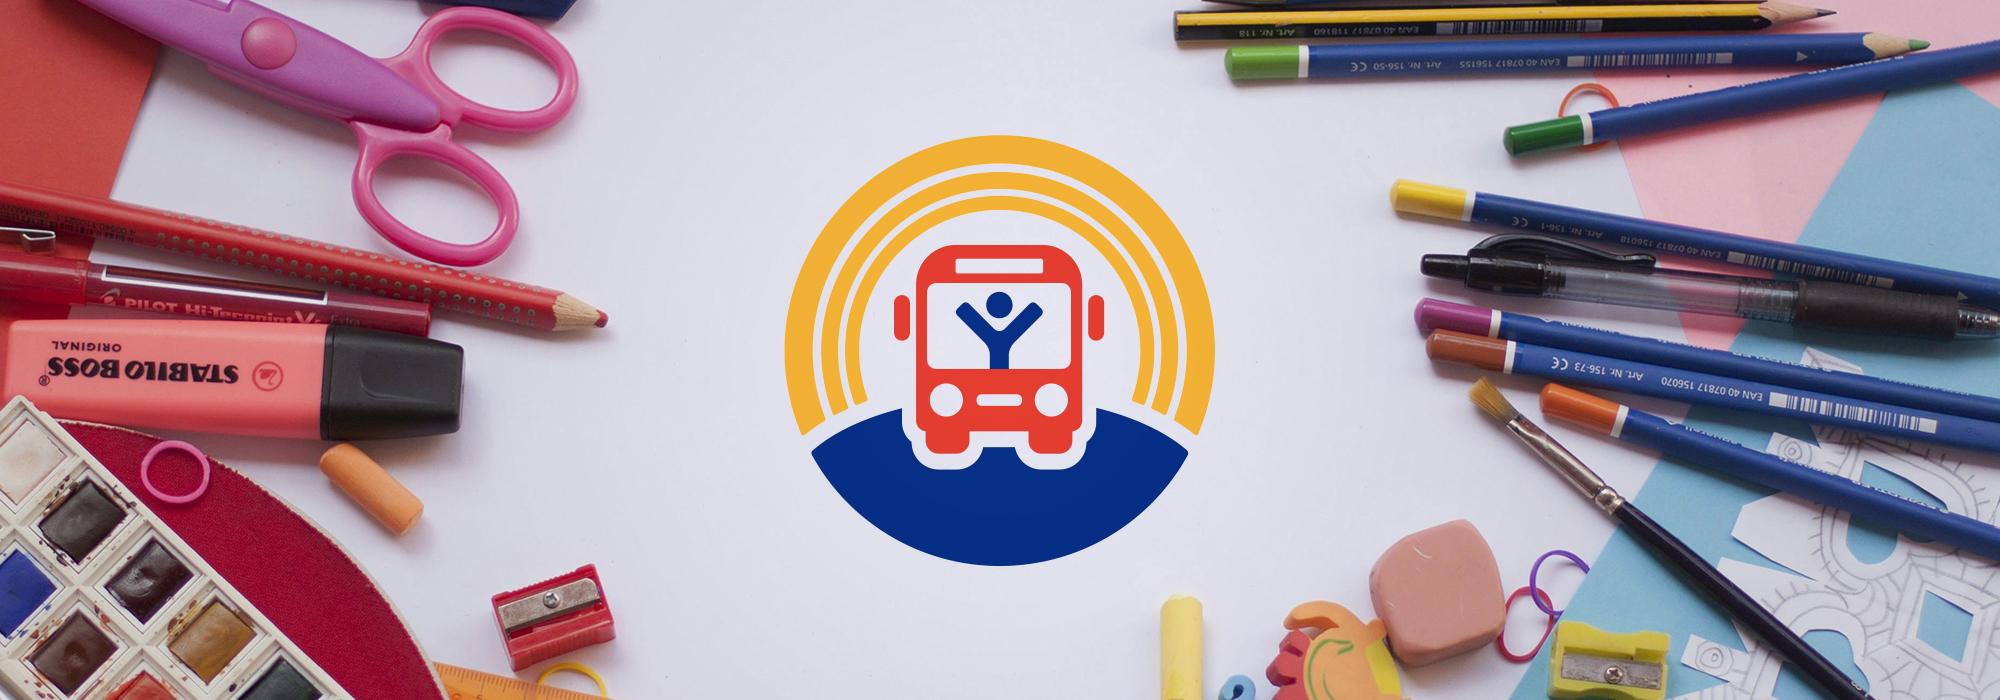 Stuff the Bus logo and school supplies